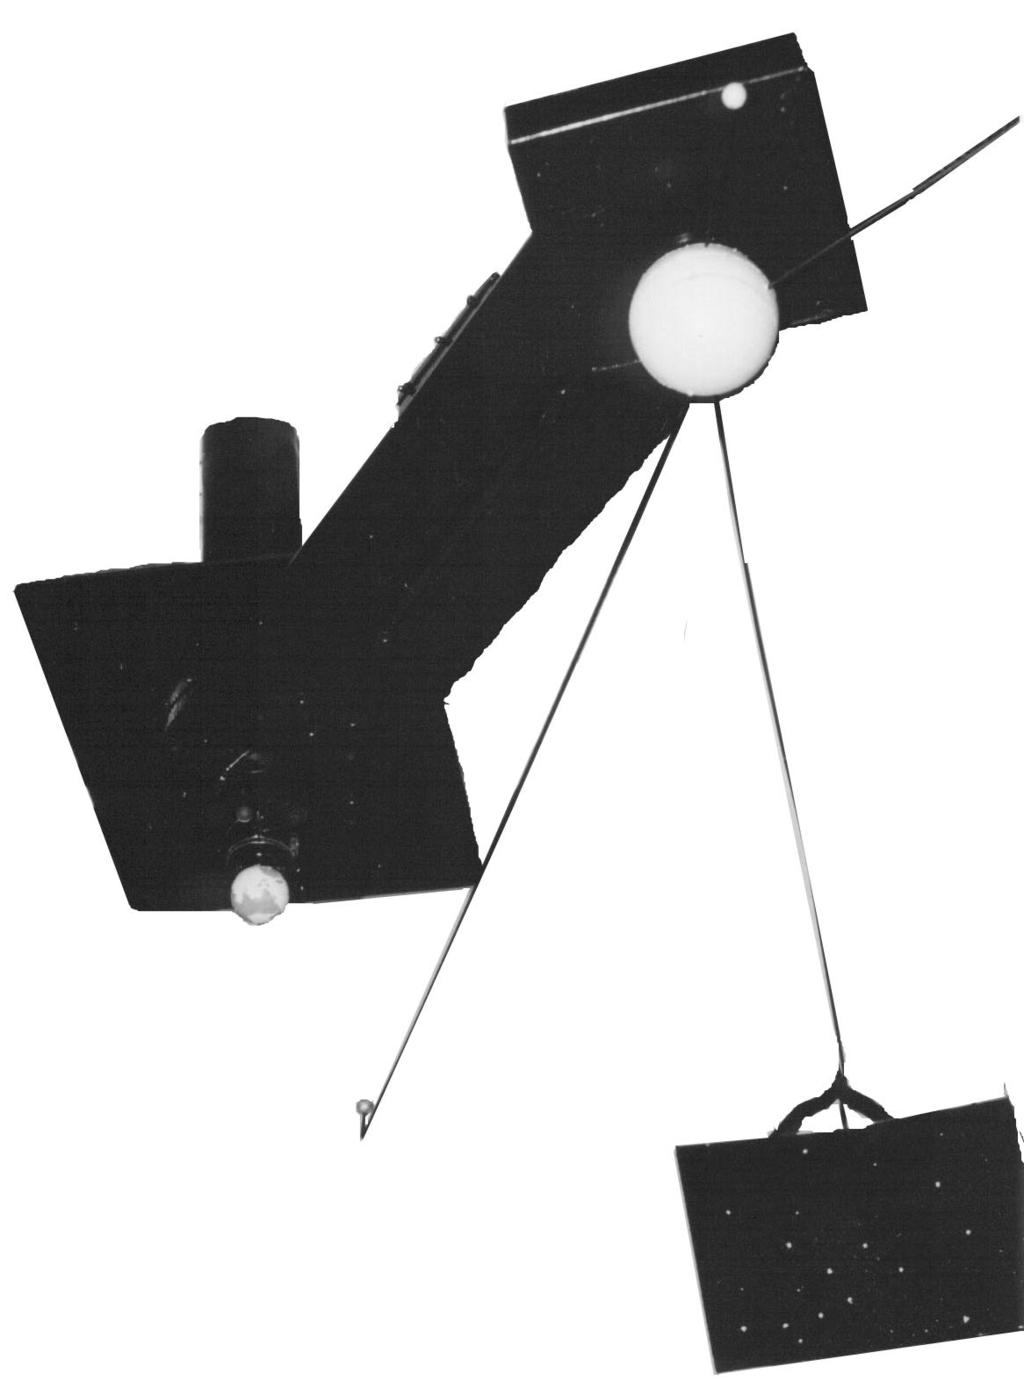 8 The Geocentric Orrery left, with Mars above it and to the right. The black rectangle at upper right represents the stars.